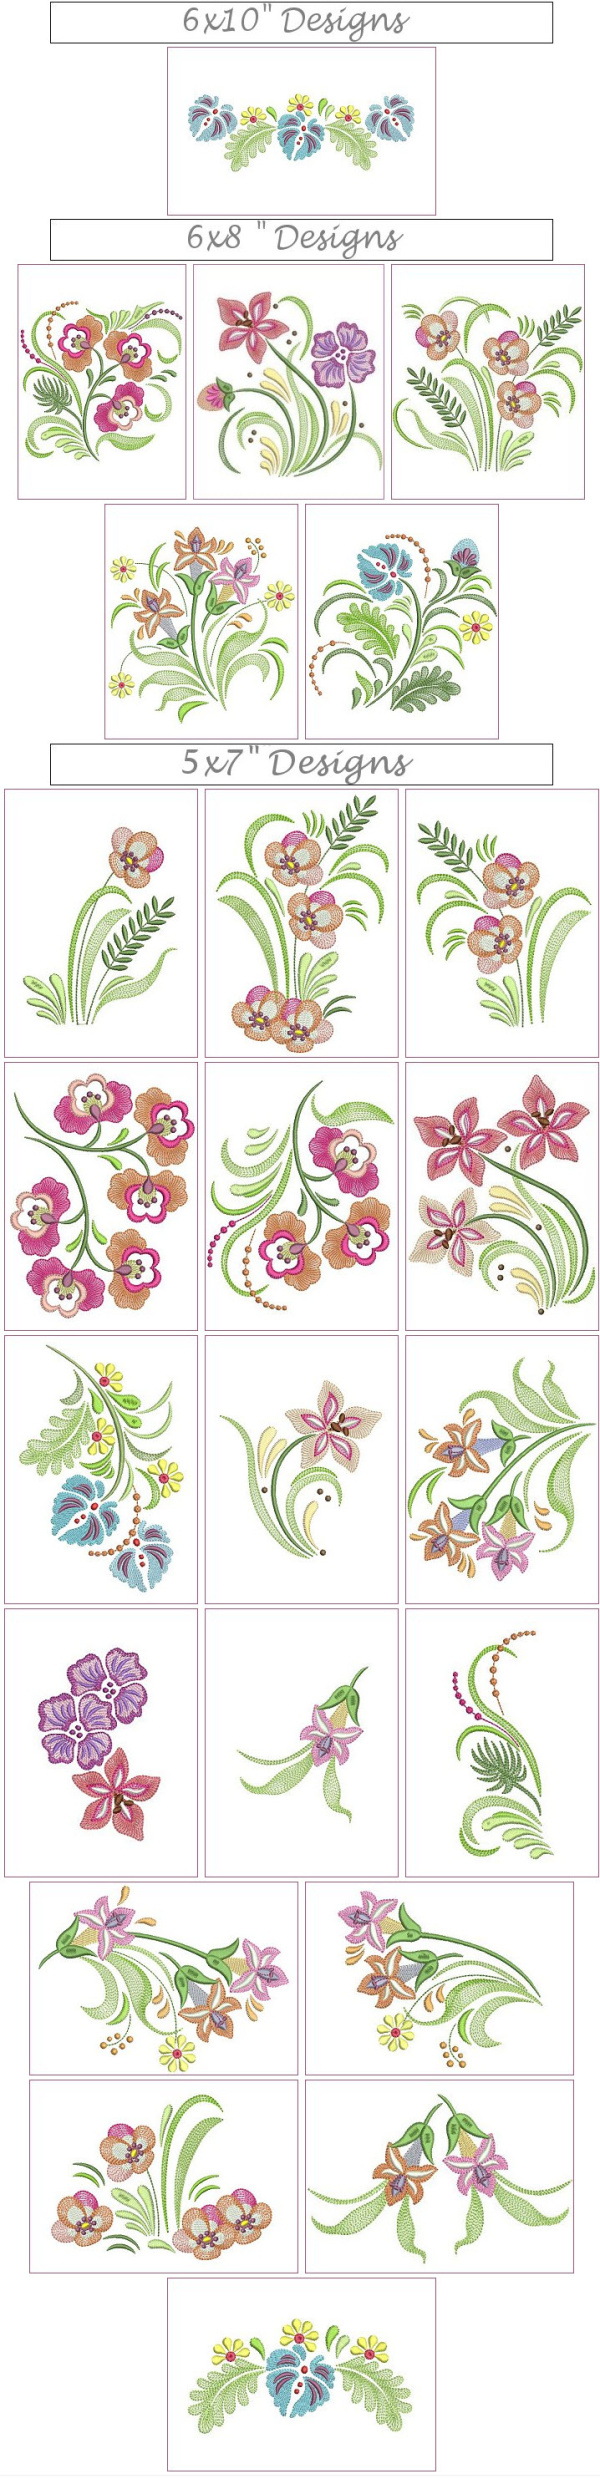 INTRO PRICED: Enchanted Garden Combo 5 - Set 3 and 4 -4